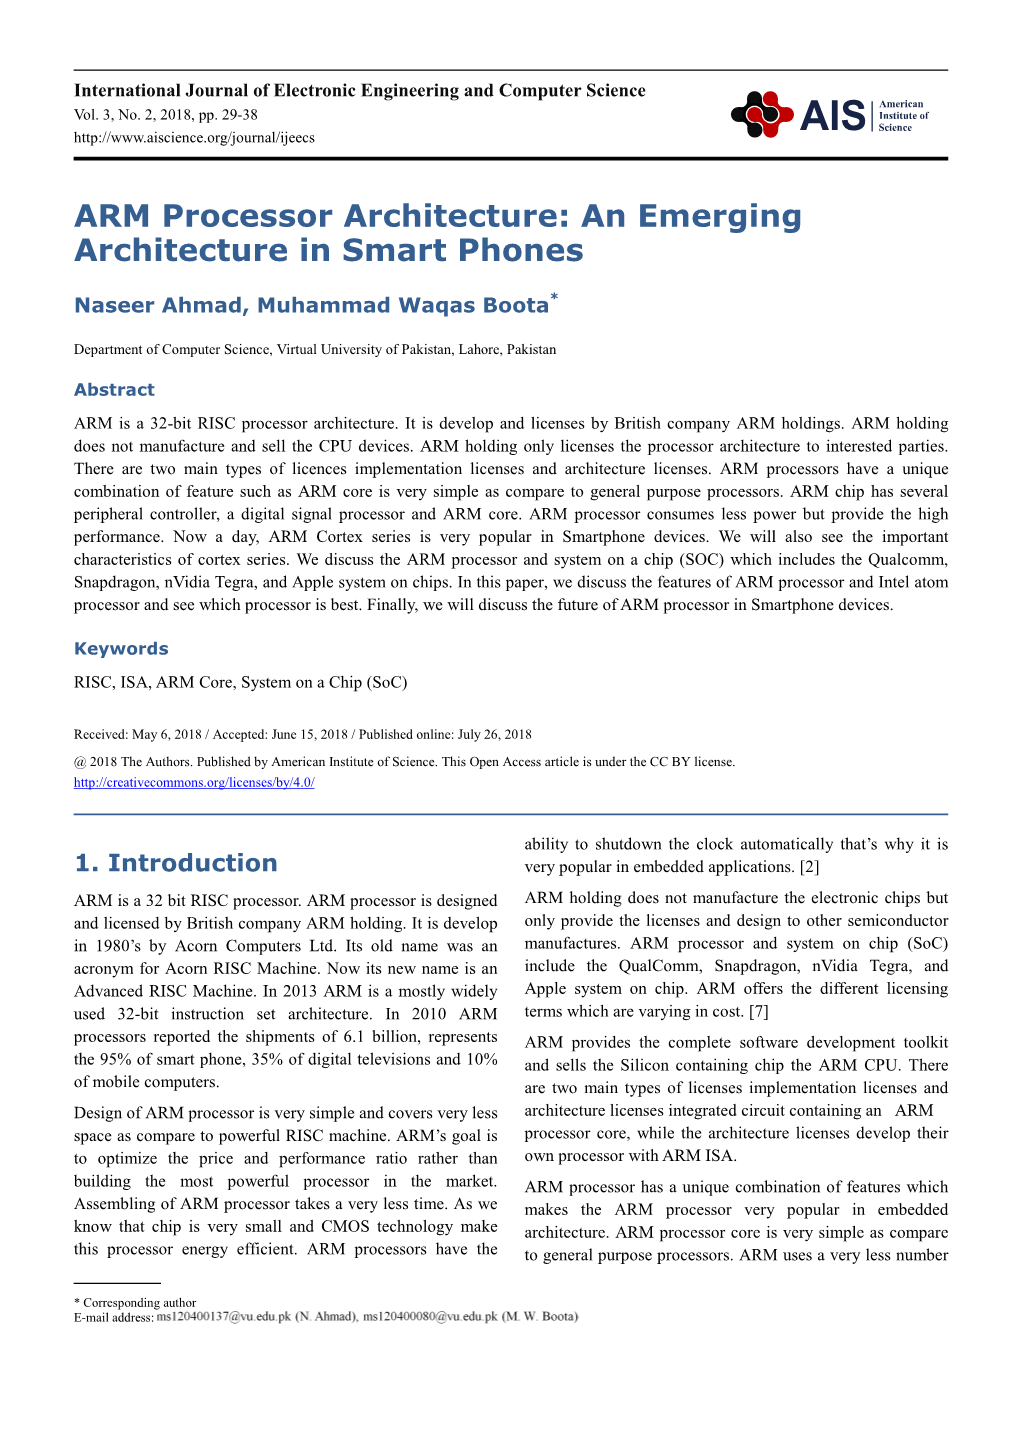 An Emerging Architecture in Smart Phones